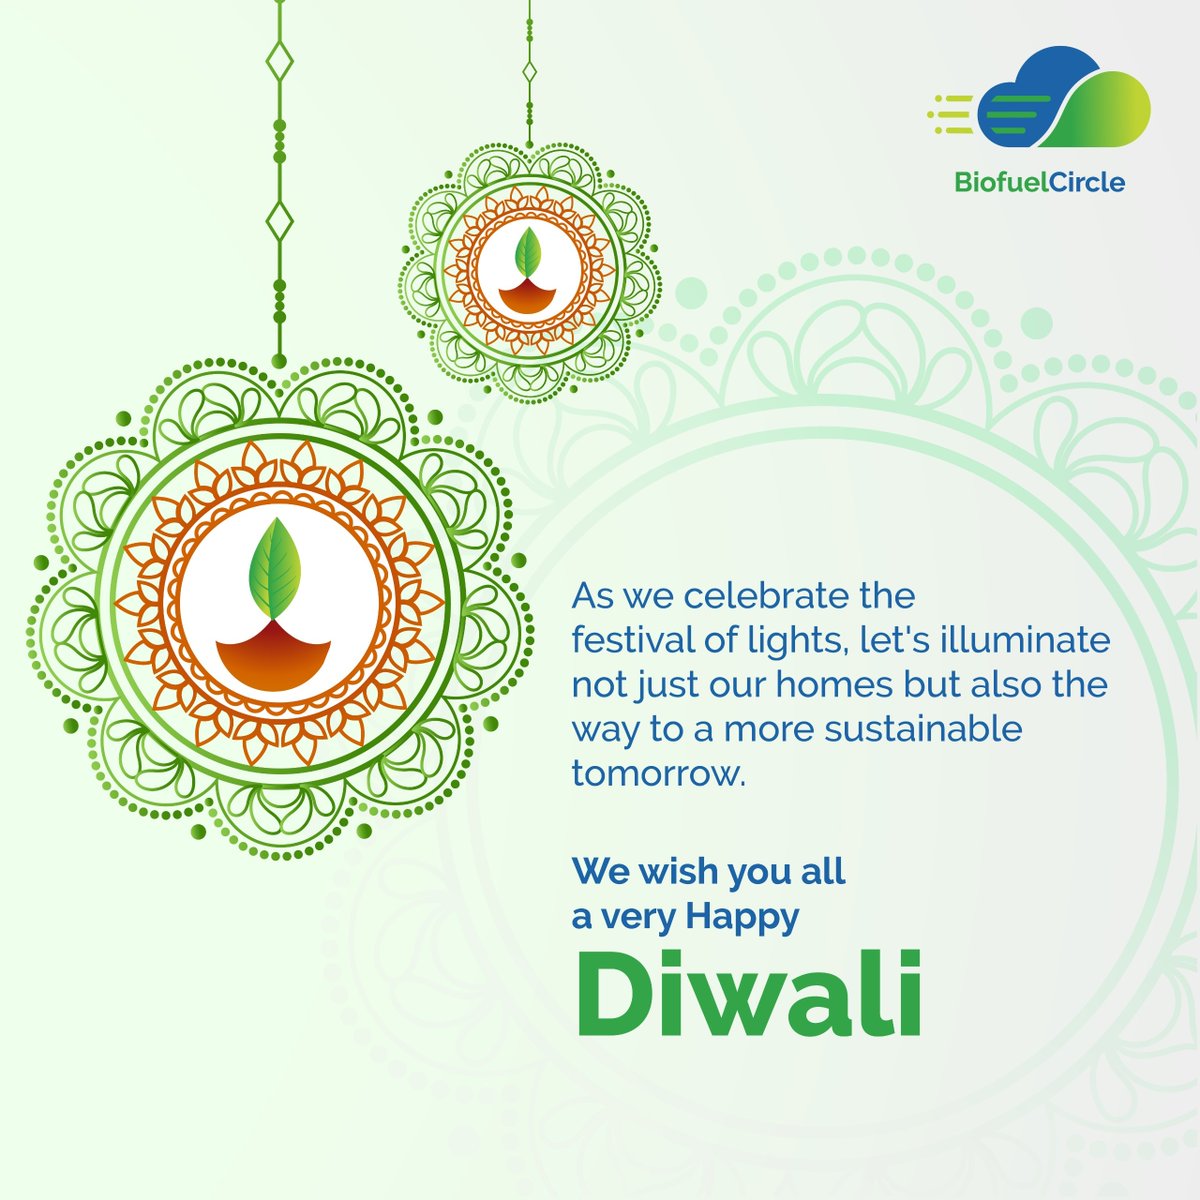 Join BiofuelCircle this festive season and light up the way to sustainable tomorrow.
Let's celebrate a cleaner, greener future!

#Diwali #GreenEnergy #BiofuelCircle #SustainableFuture #CleanerPlanet